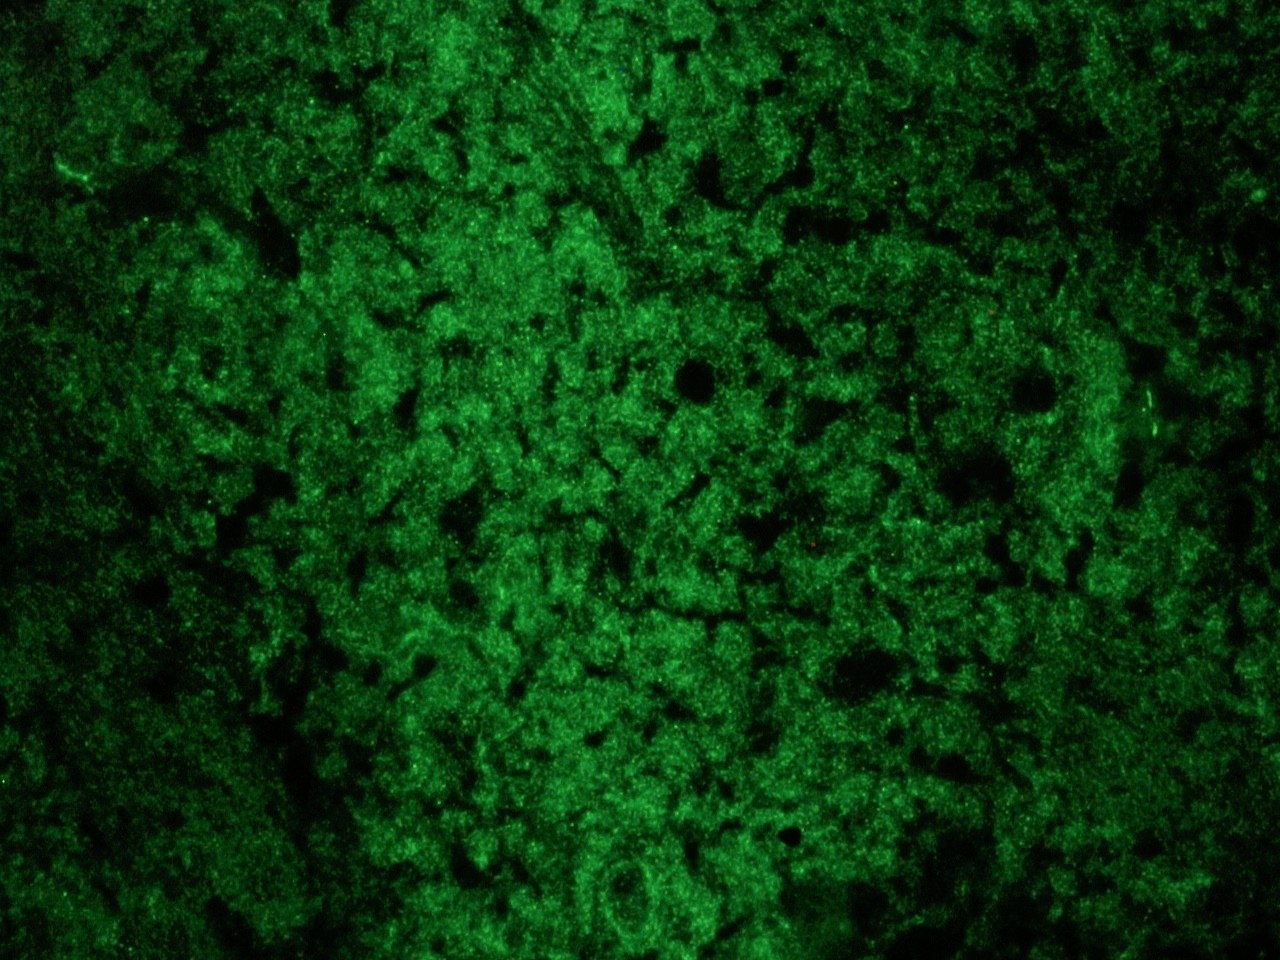 Figure 1. Indirect immunofluorescence staining of reticulon-1A/NSP-A in rat brain frozen section using MUB1312P (clone MON162) at a 1:500 dilution.